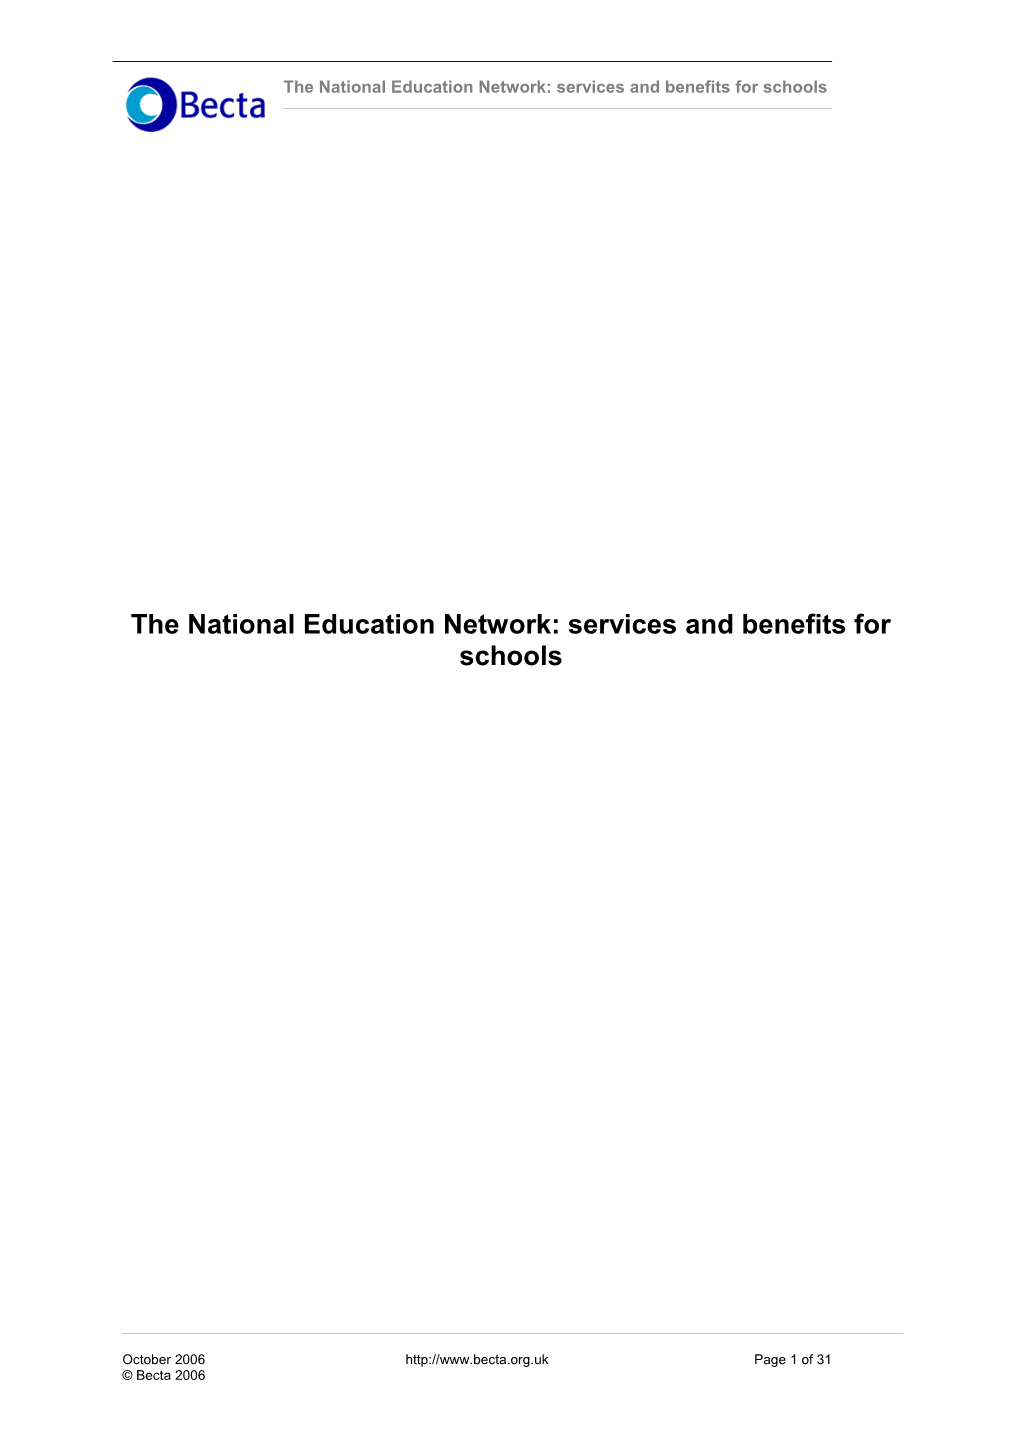 The National Education Network: Services and Benefits for Schools